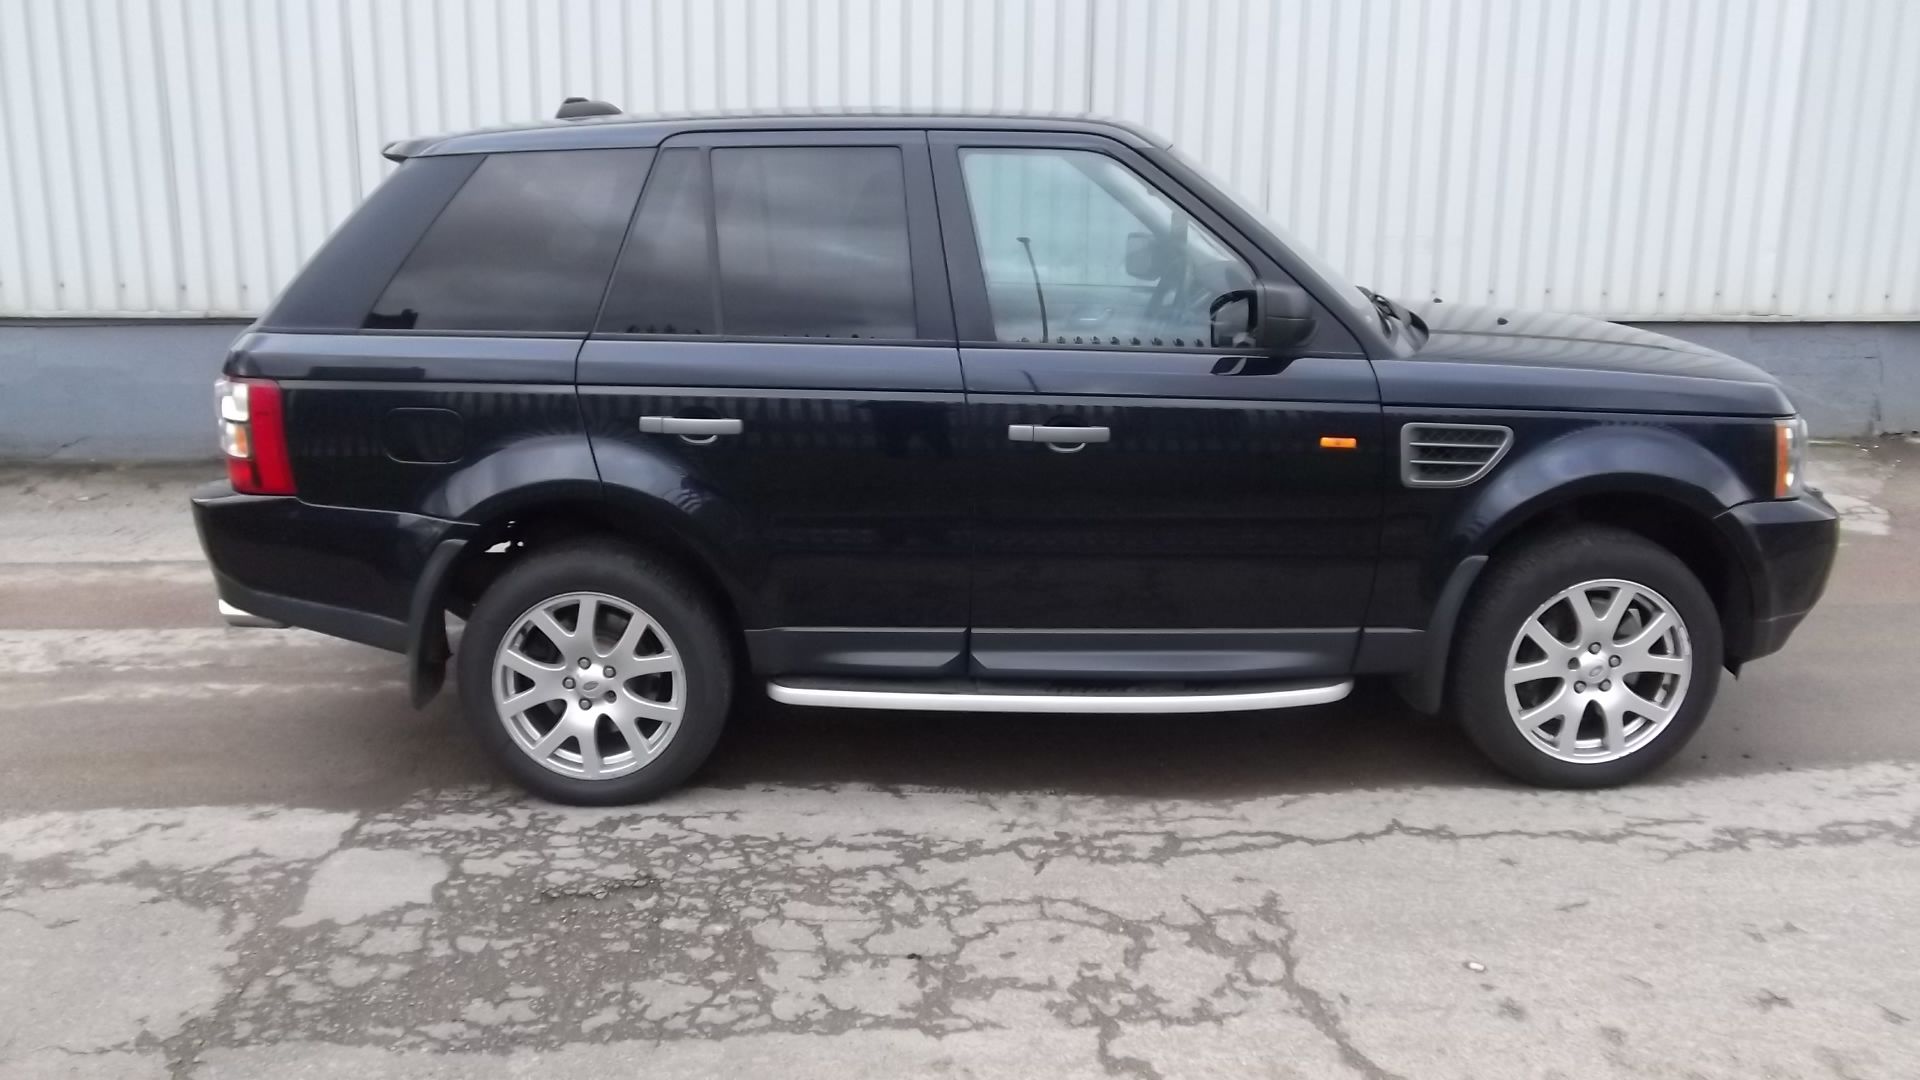 2008 Land Rover Range Rover Sp Hse 2.7 Tdv6 A 5Dr SUV - CL505 - NO VAT ON THE HAMMER - Location: Cor - Image 10 of 15